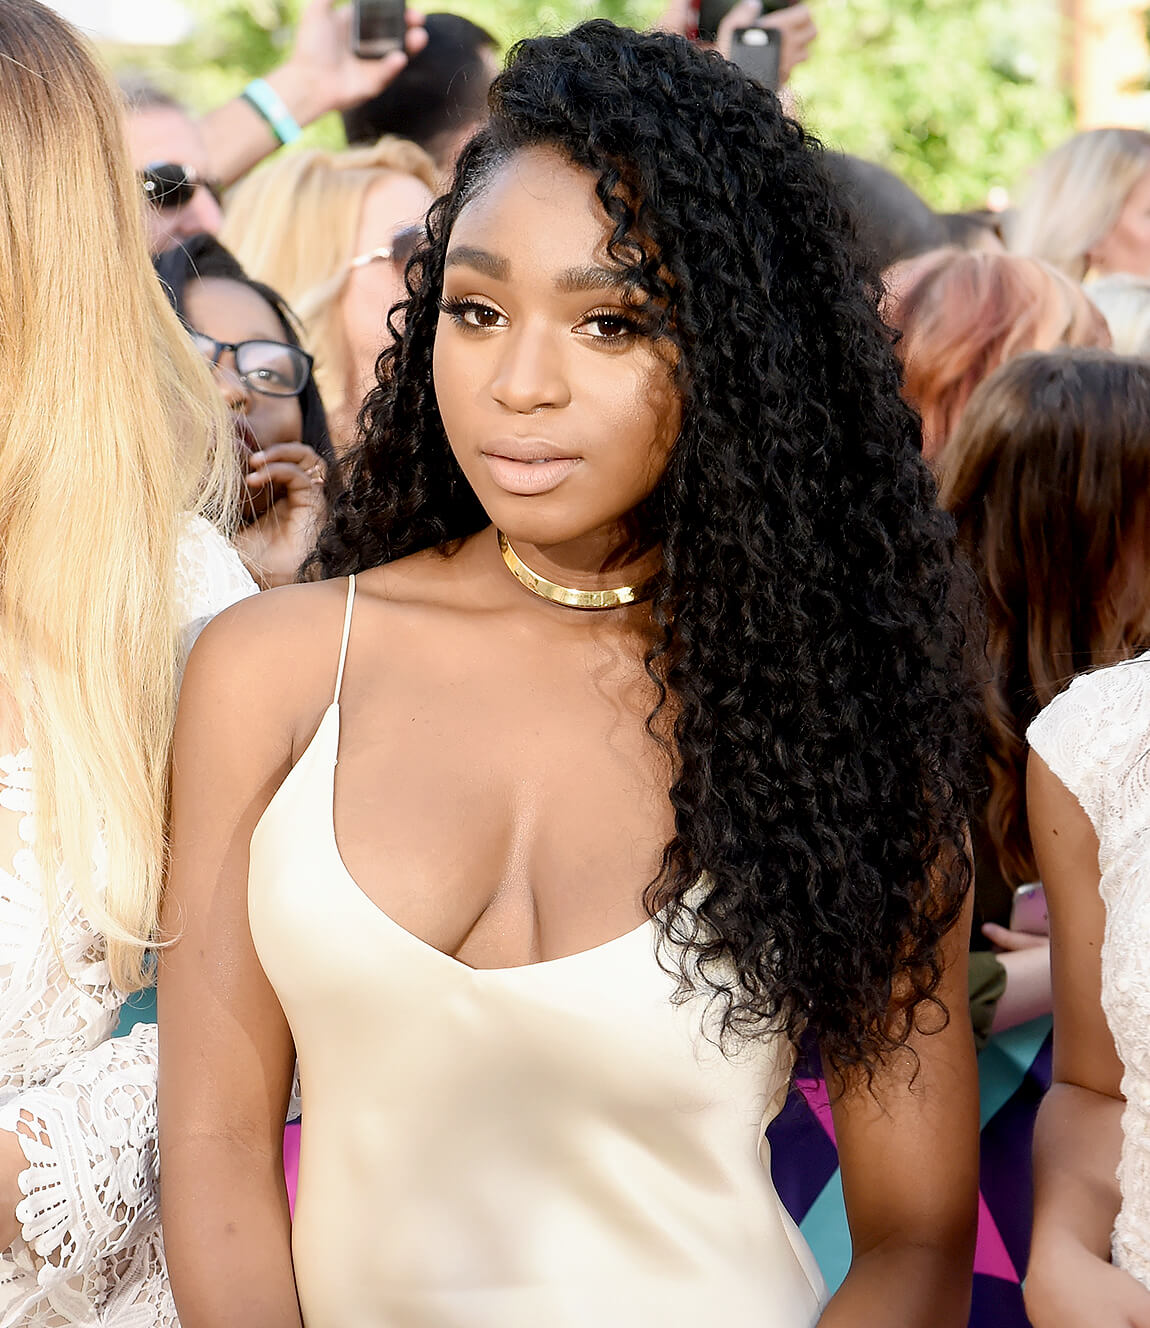 The Hottest Photos Of Normani.